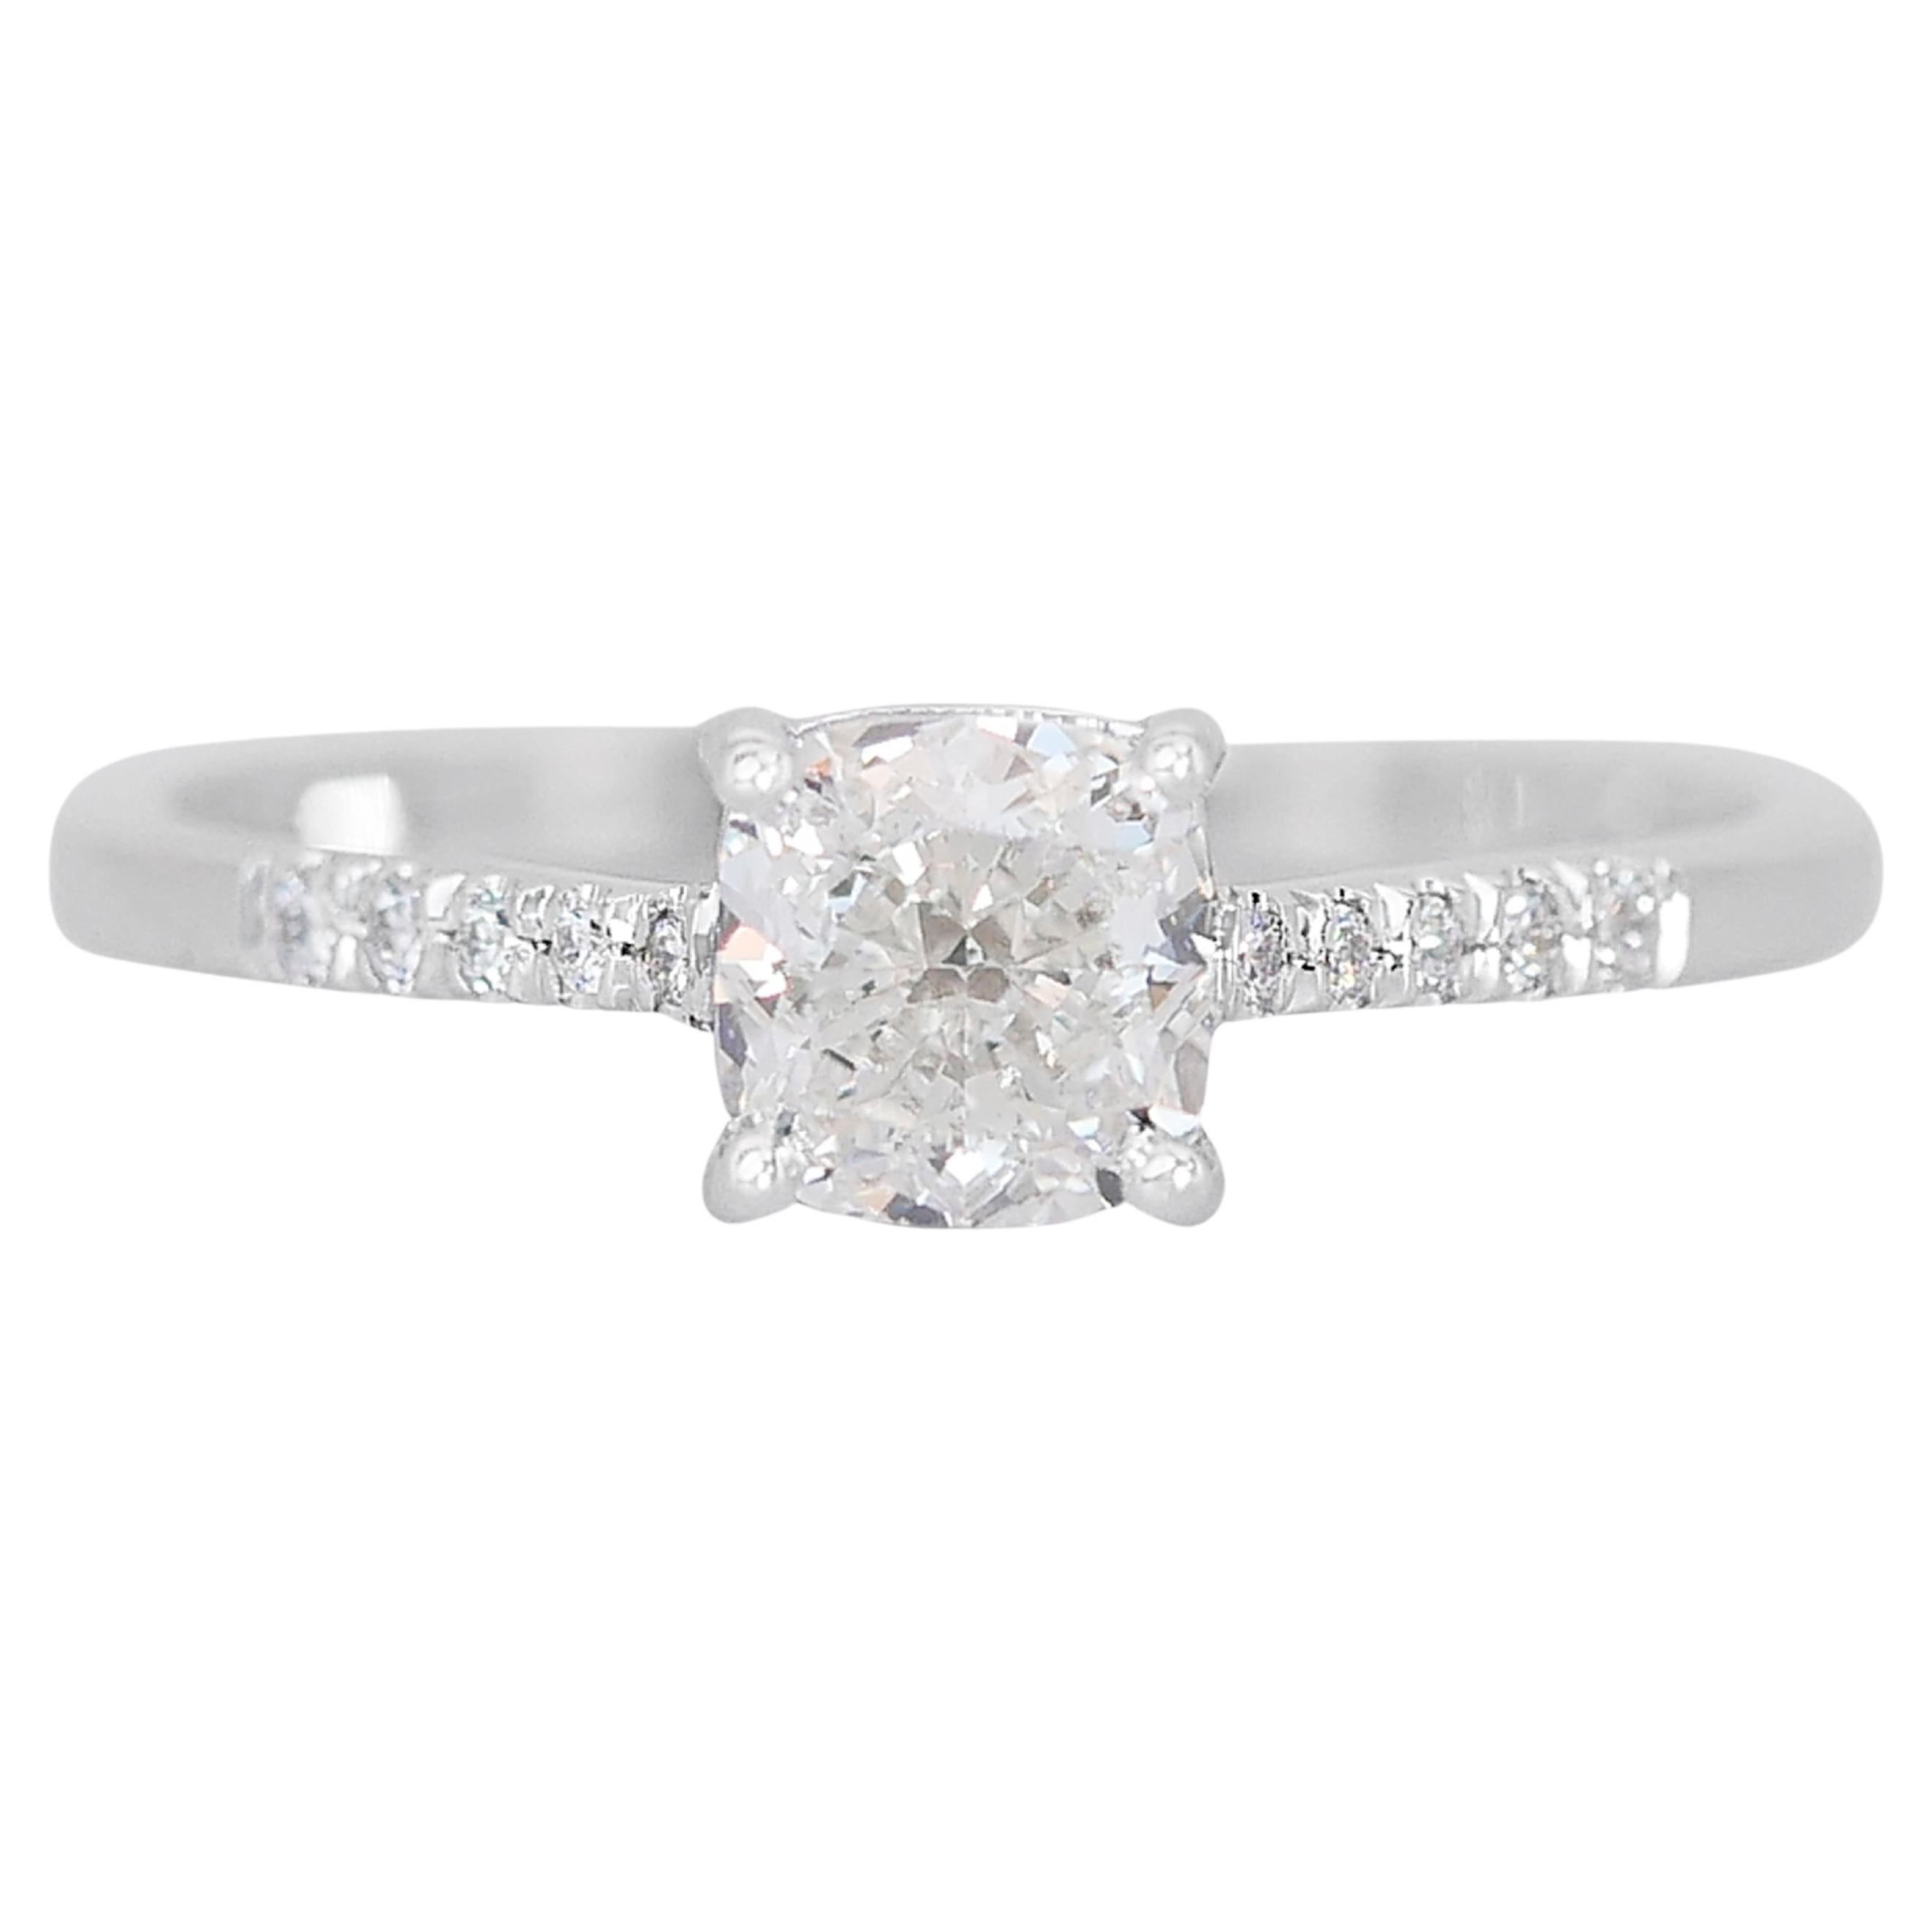 Lustrous 1.04ct Diamonds Pave Ring in 14k White Gold - IGI Certified